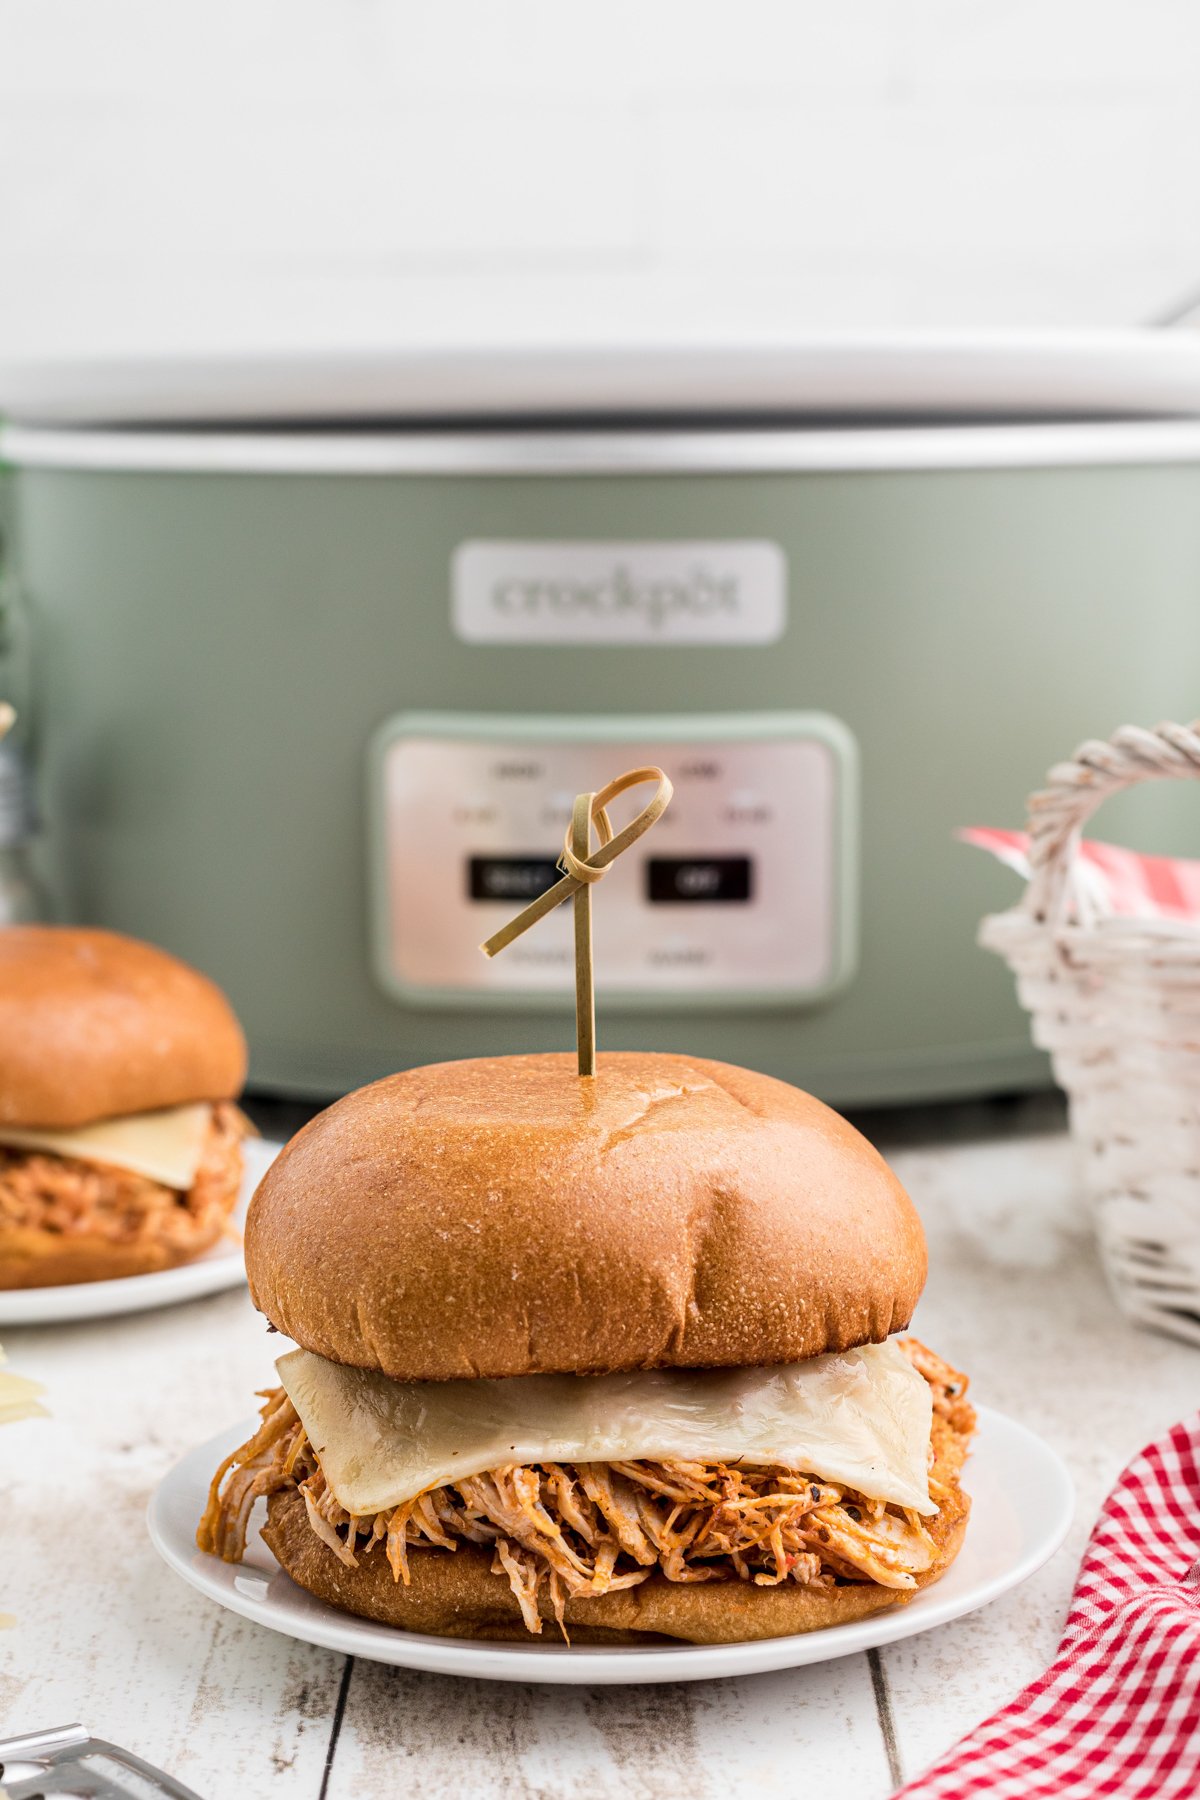 Chicken sandwich sitting in front of a slow cooker.